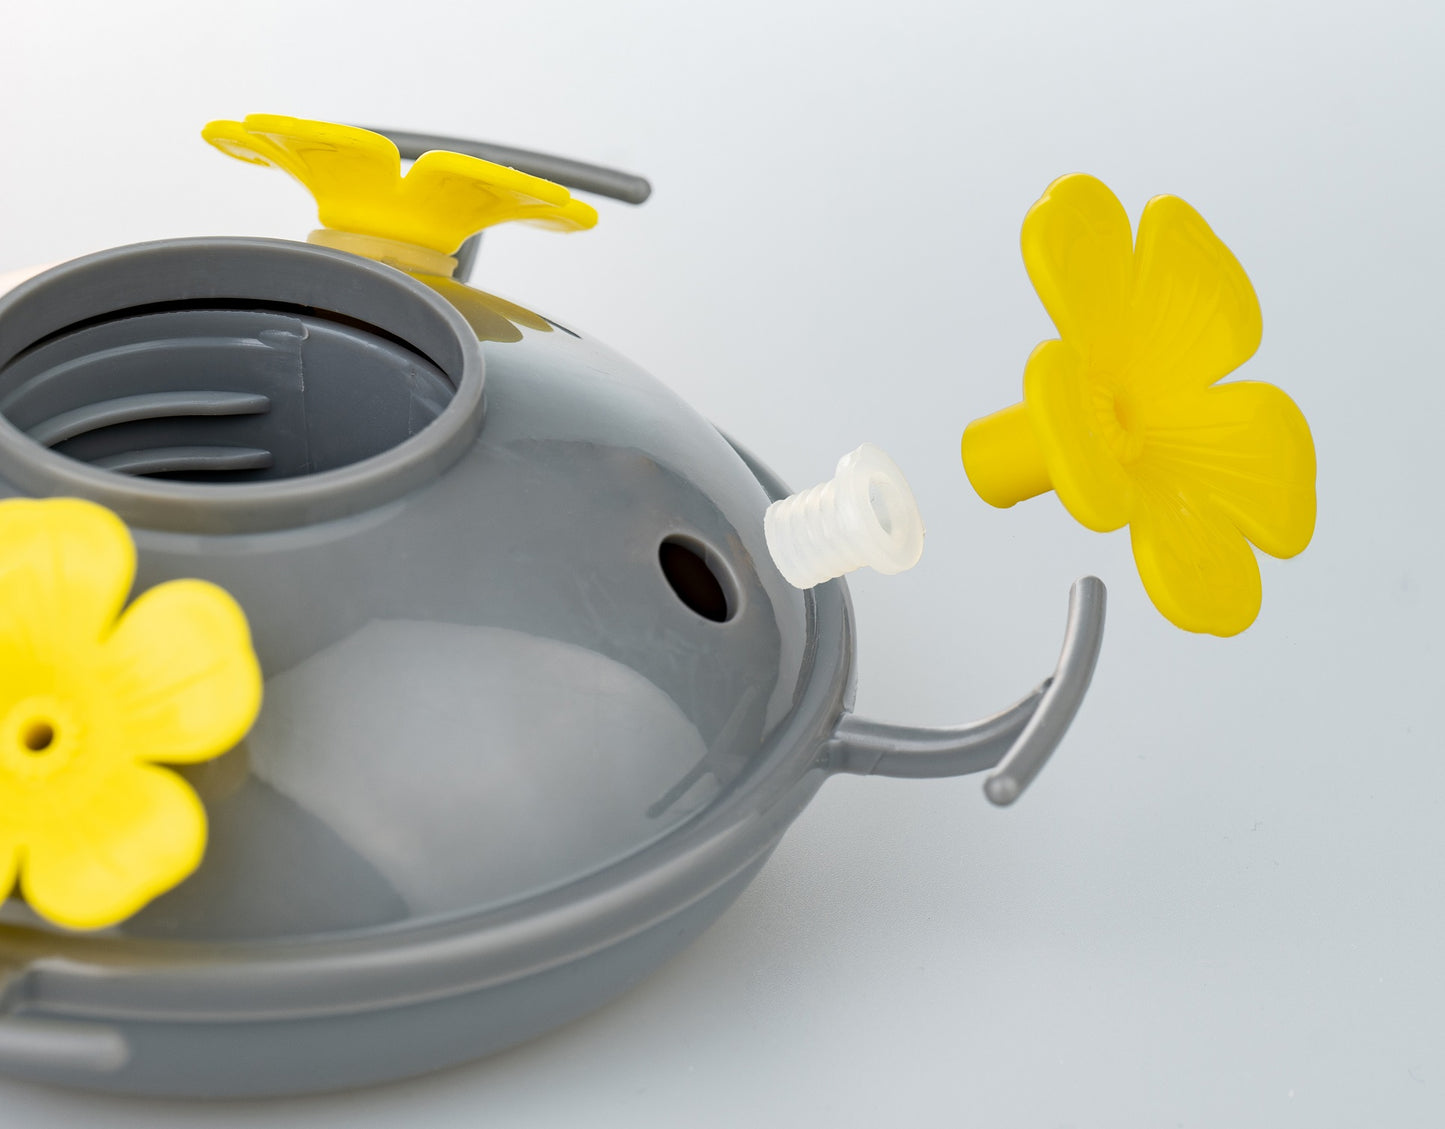 Muse Garden Hummingbird Feeder Original Replacement Part Base, Containing Extra 4 Removable Replacement Yellow Flowers